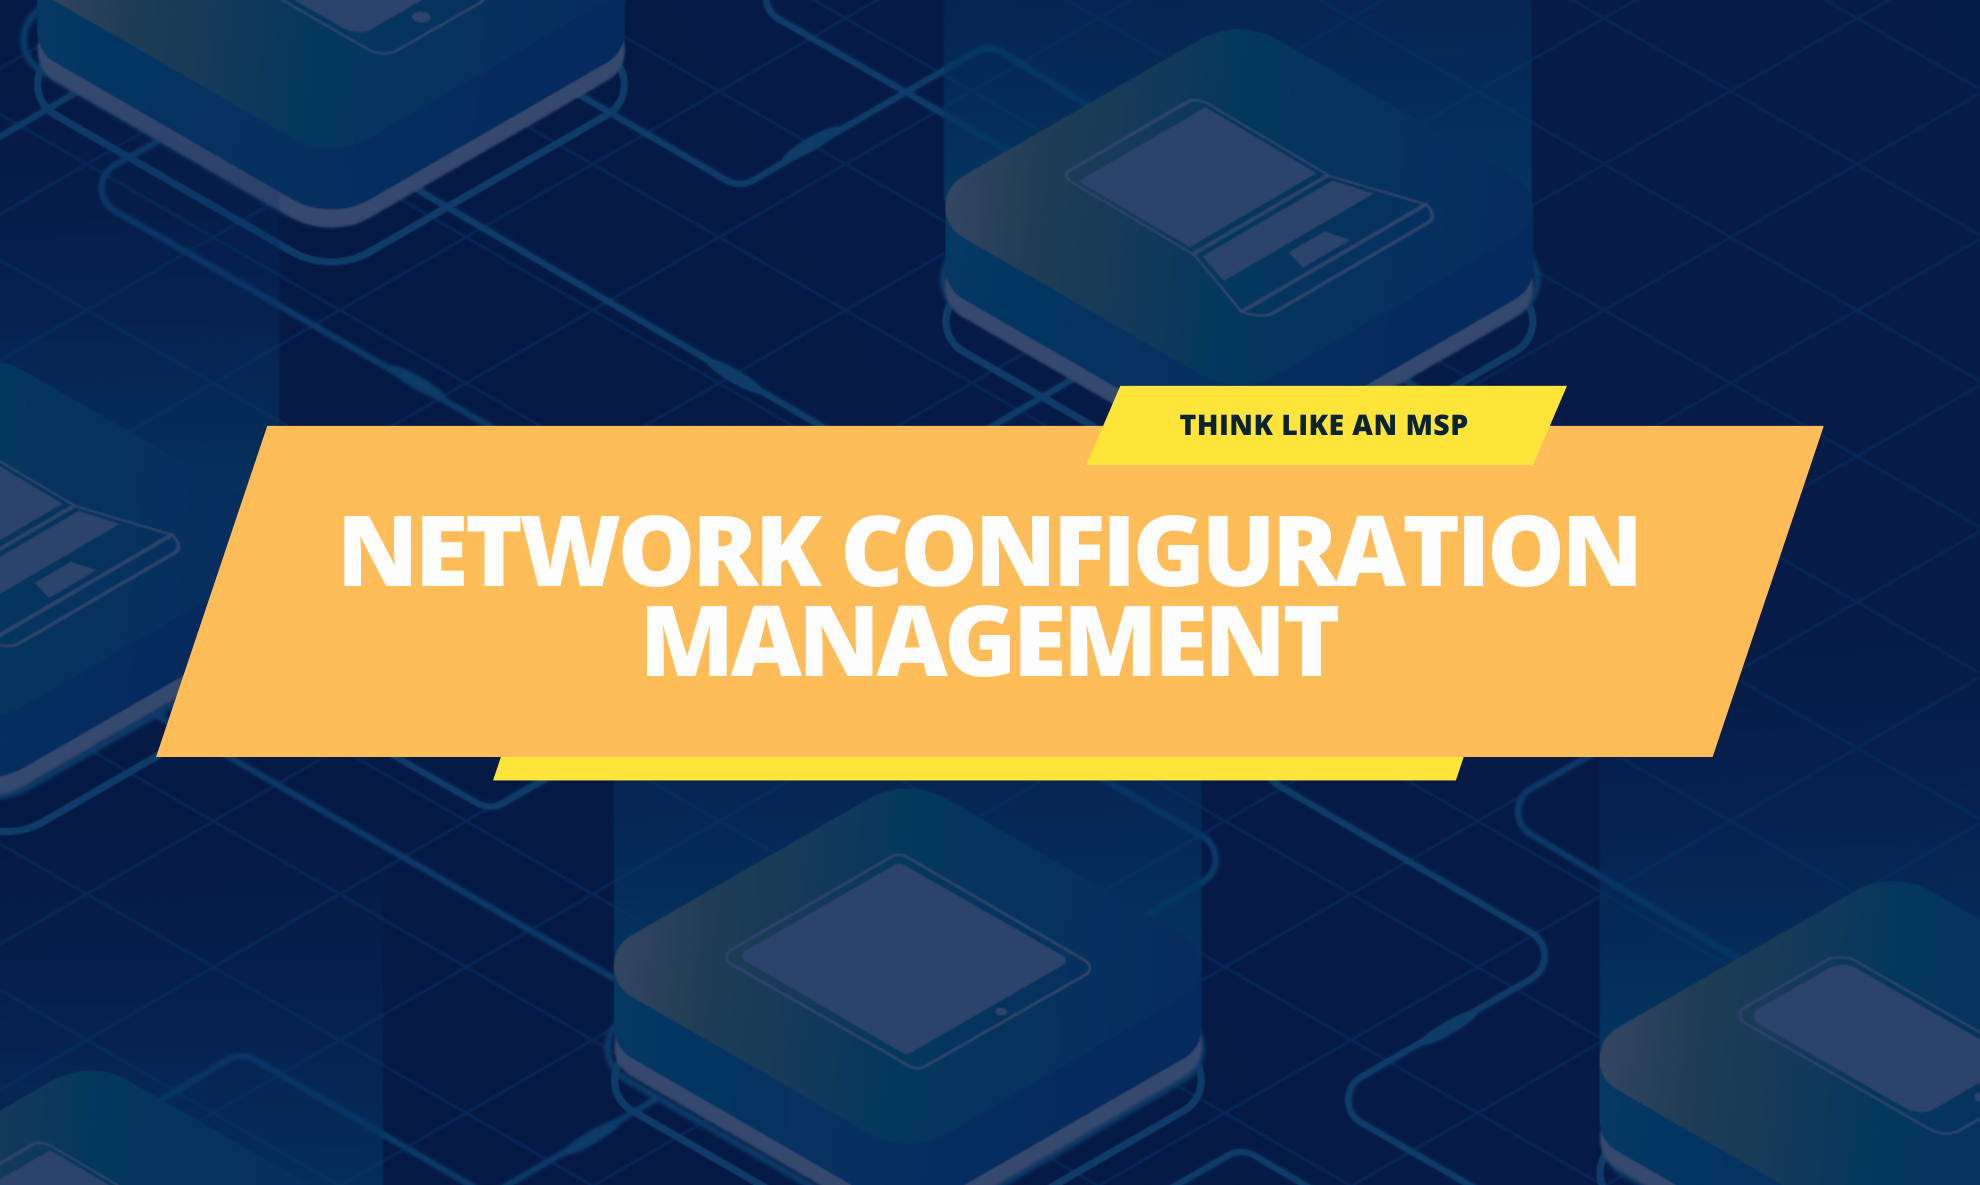 What is network configuration management?